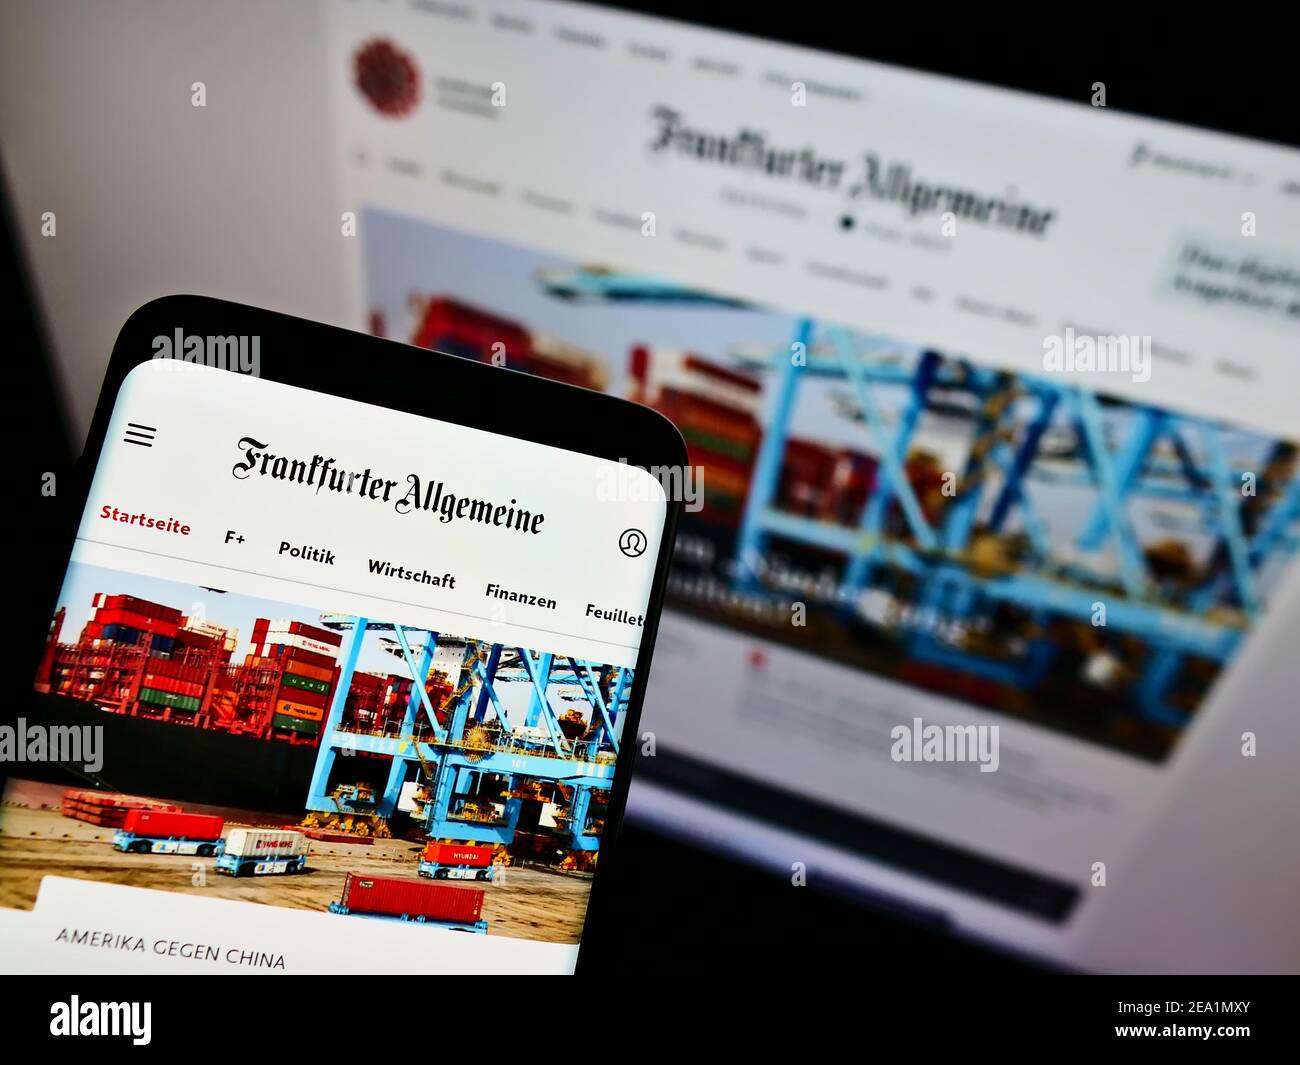 Mobile phone with website and logo of German newspaper Frankfurter Allgemeine Zeitung (FAZ) on screen in front of monitor. Focus on phone display. Stock Photo